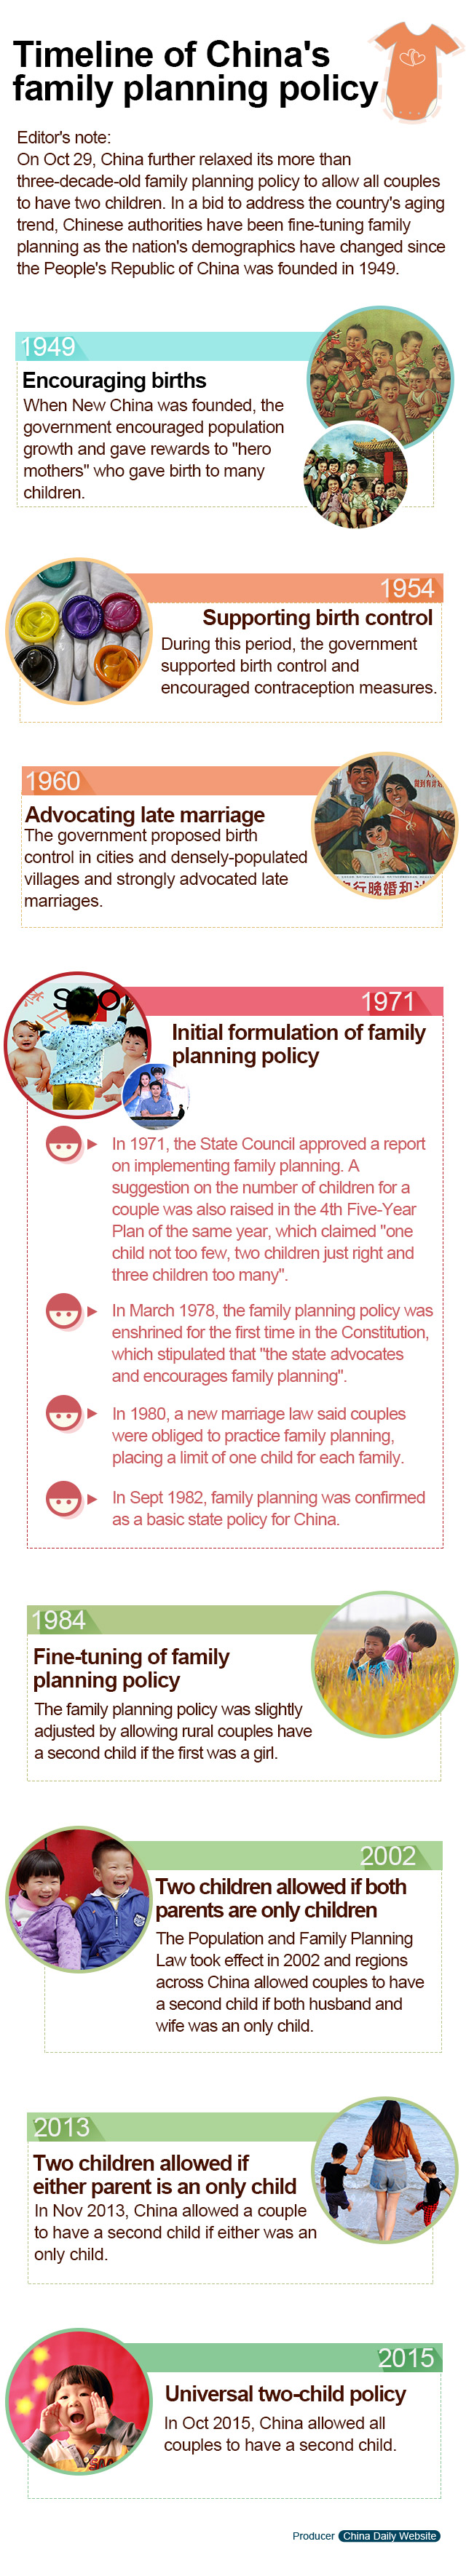 Timeline of China's family planning policy